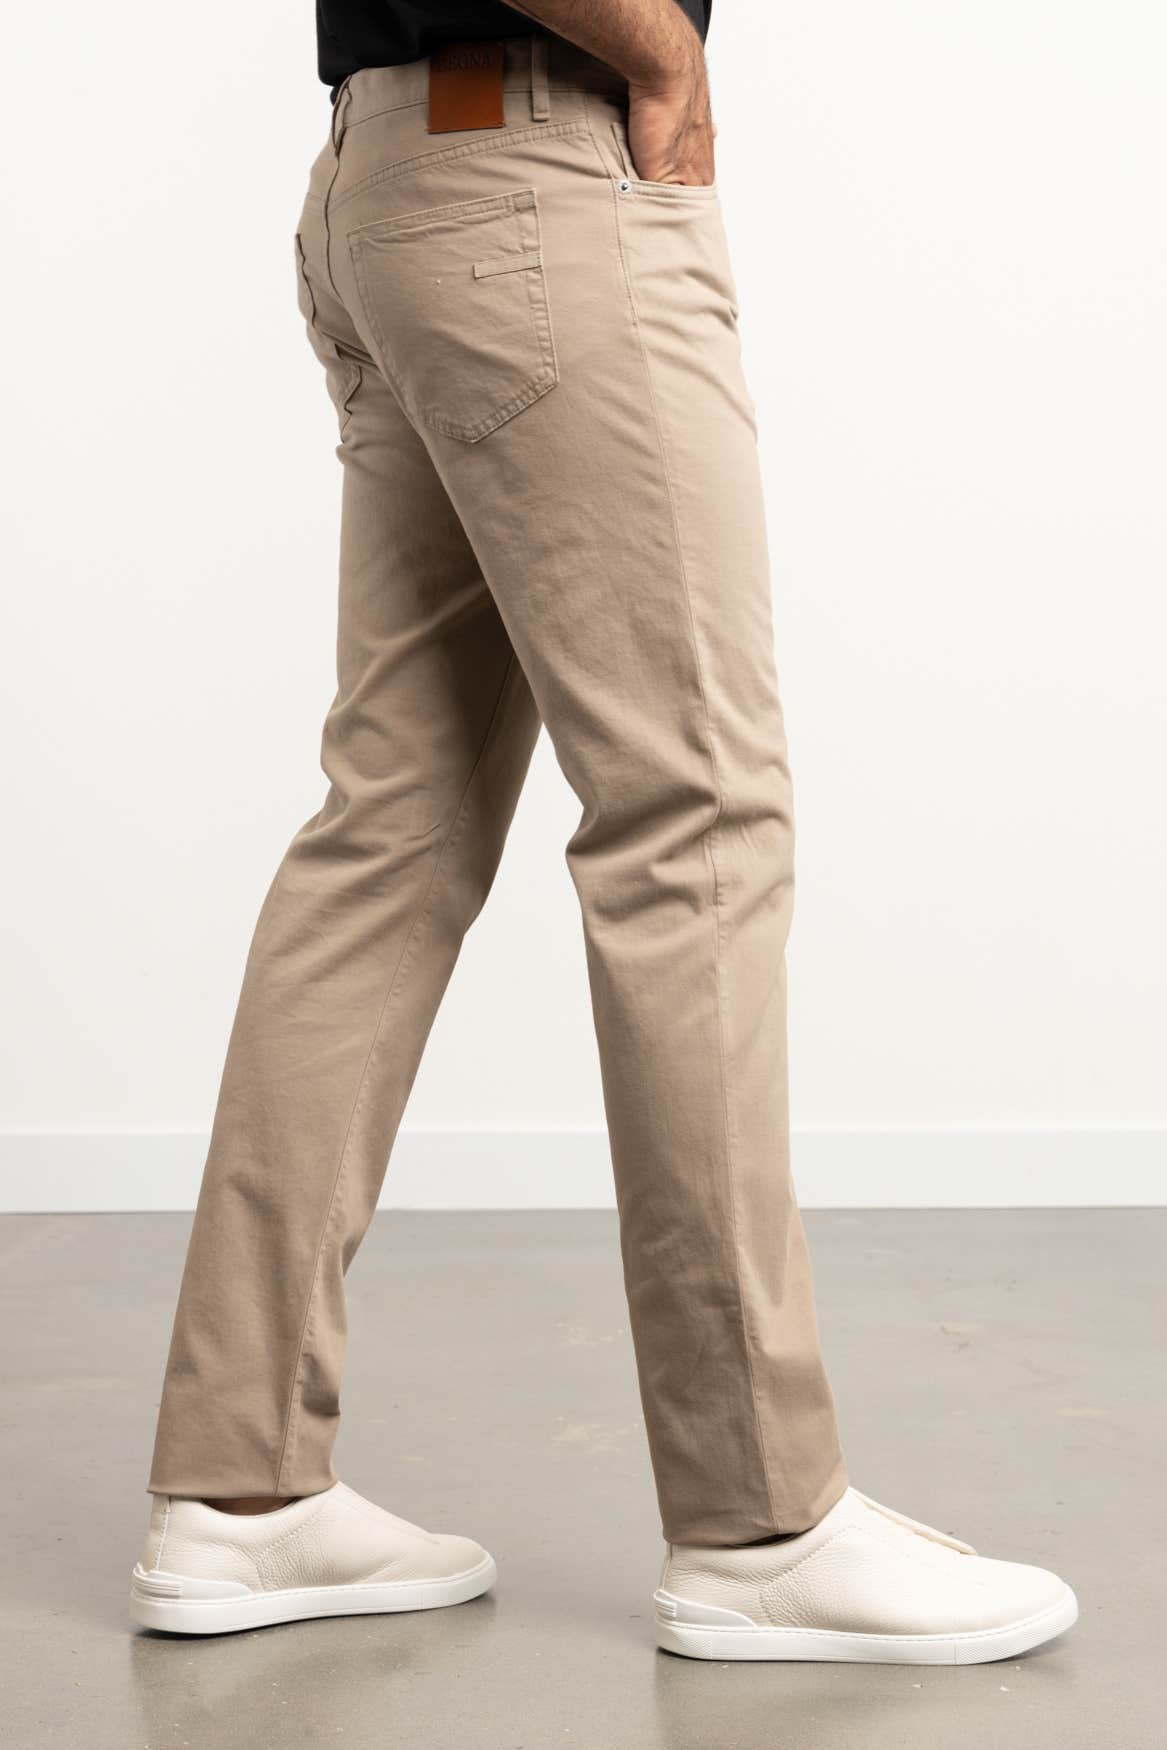 Cotton The 5-Pocket Tan – Clothing City Helm Stretch Jeans